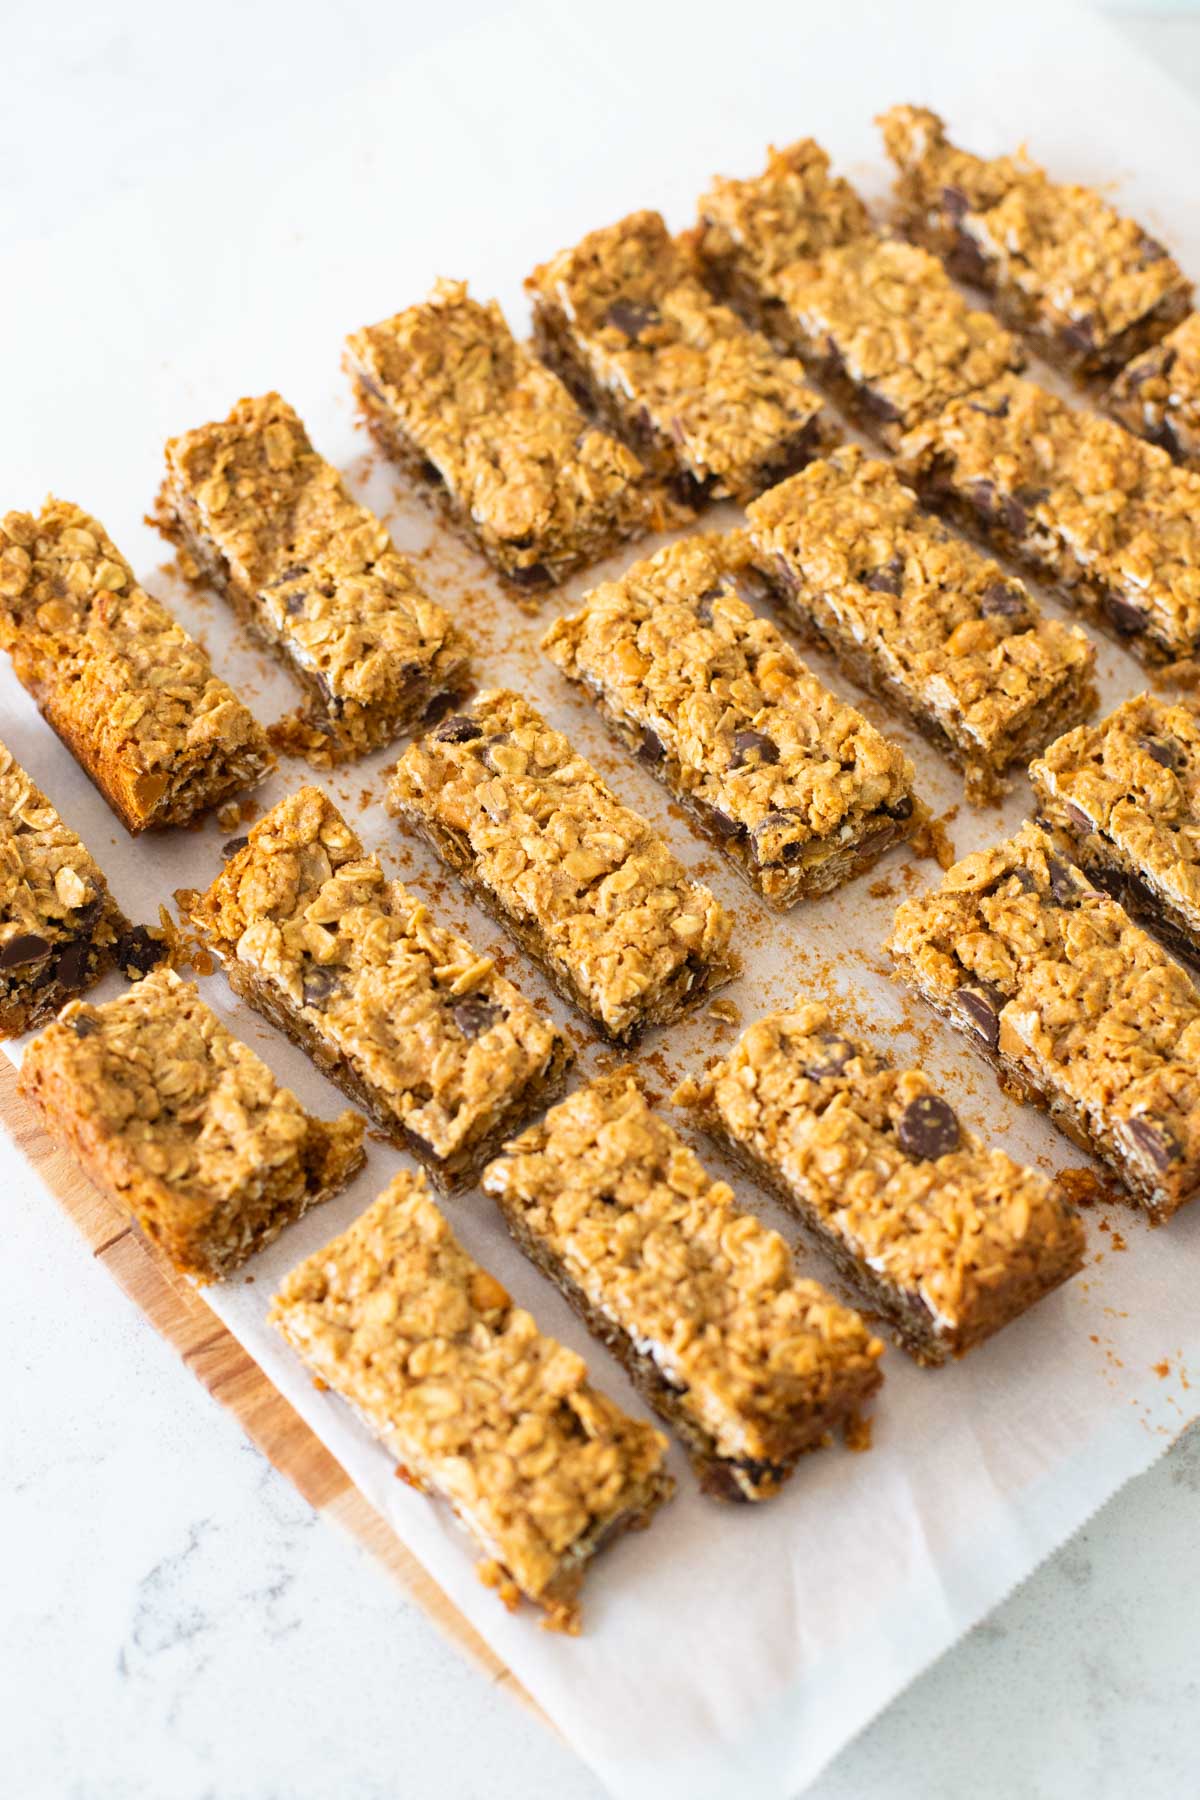 The bars have been cooled completely and cut into granola bar shape with a chef knife.